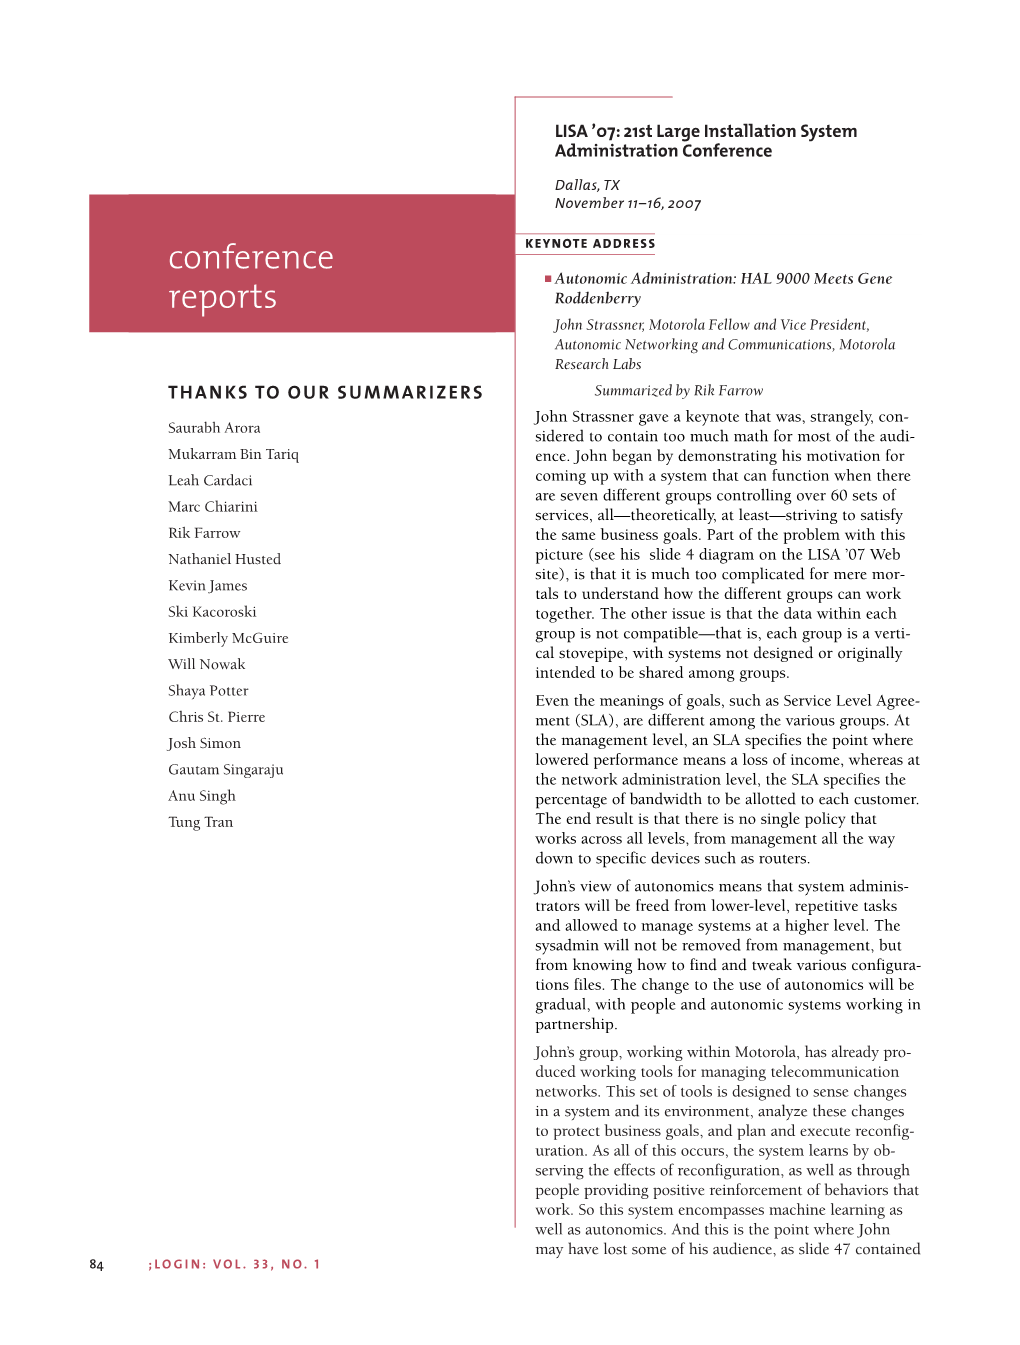 Conference Reports From